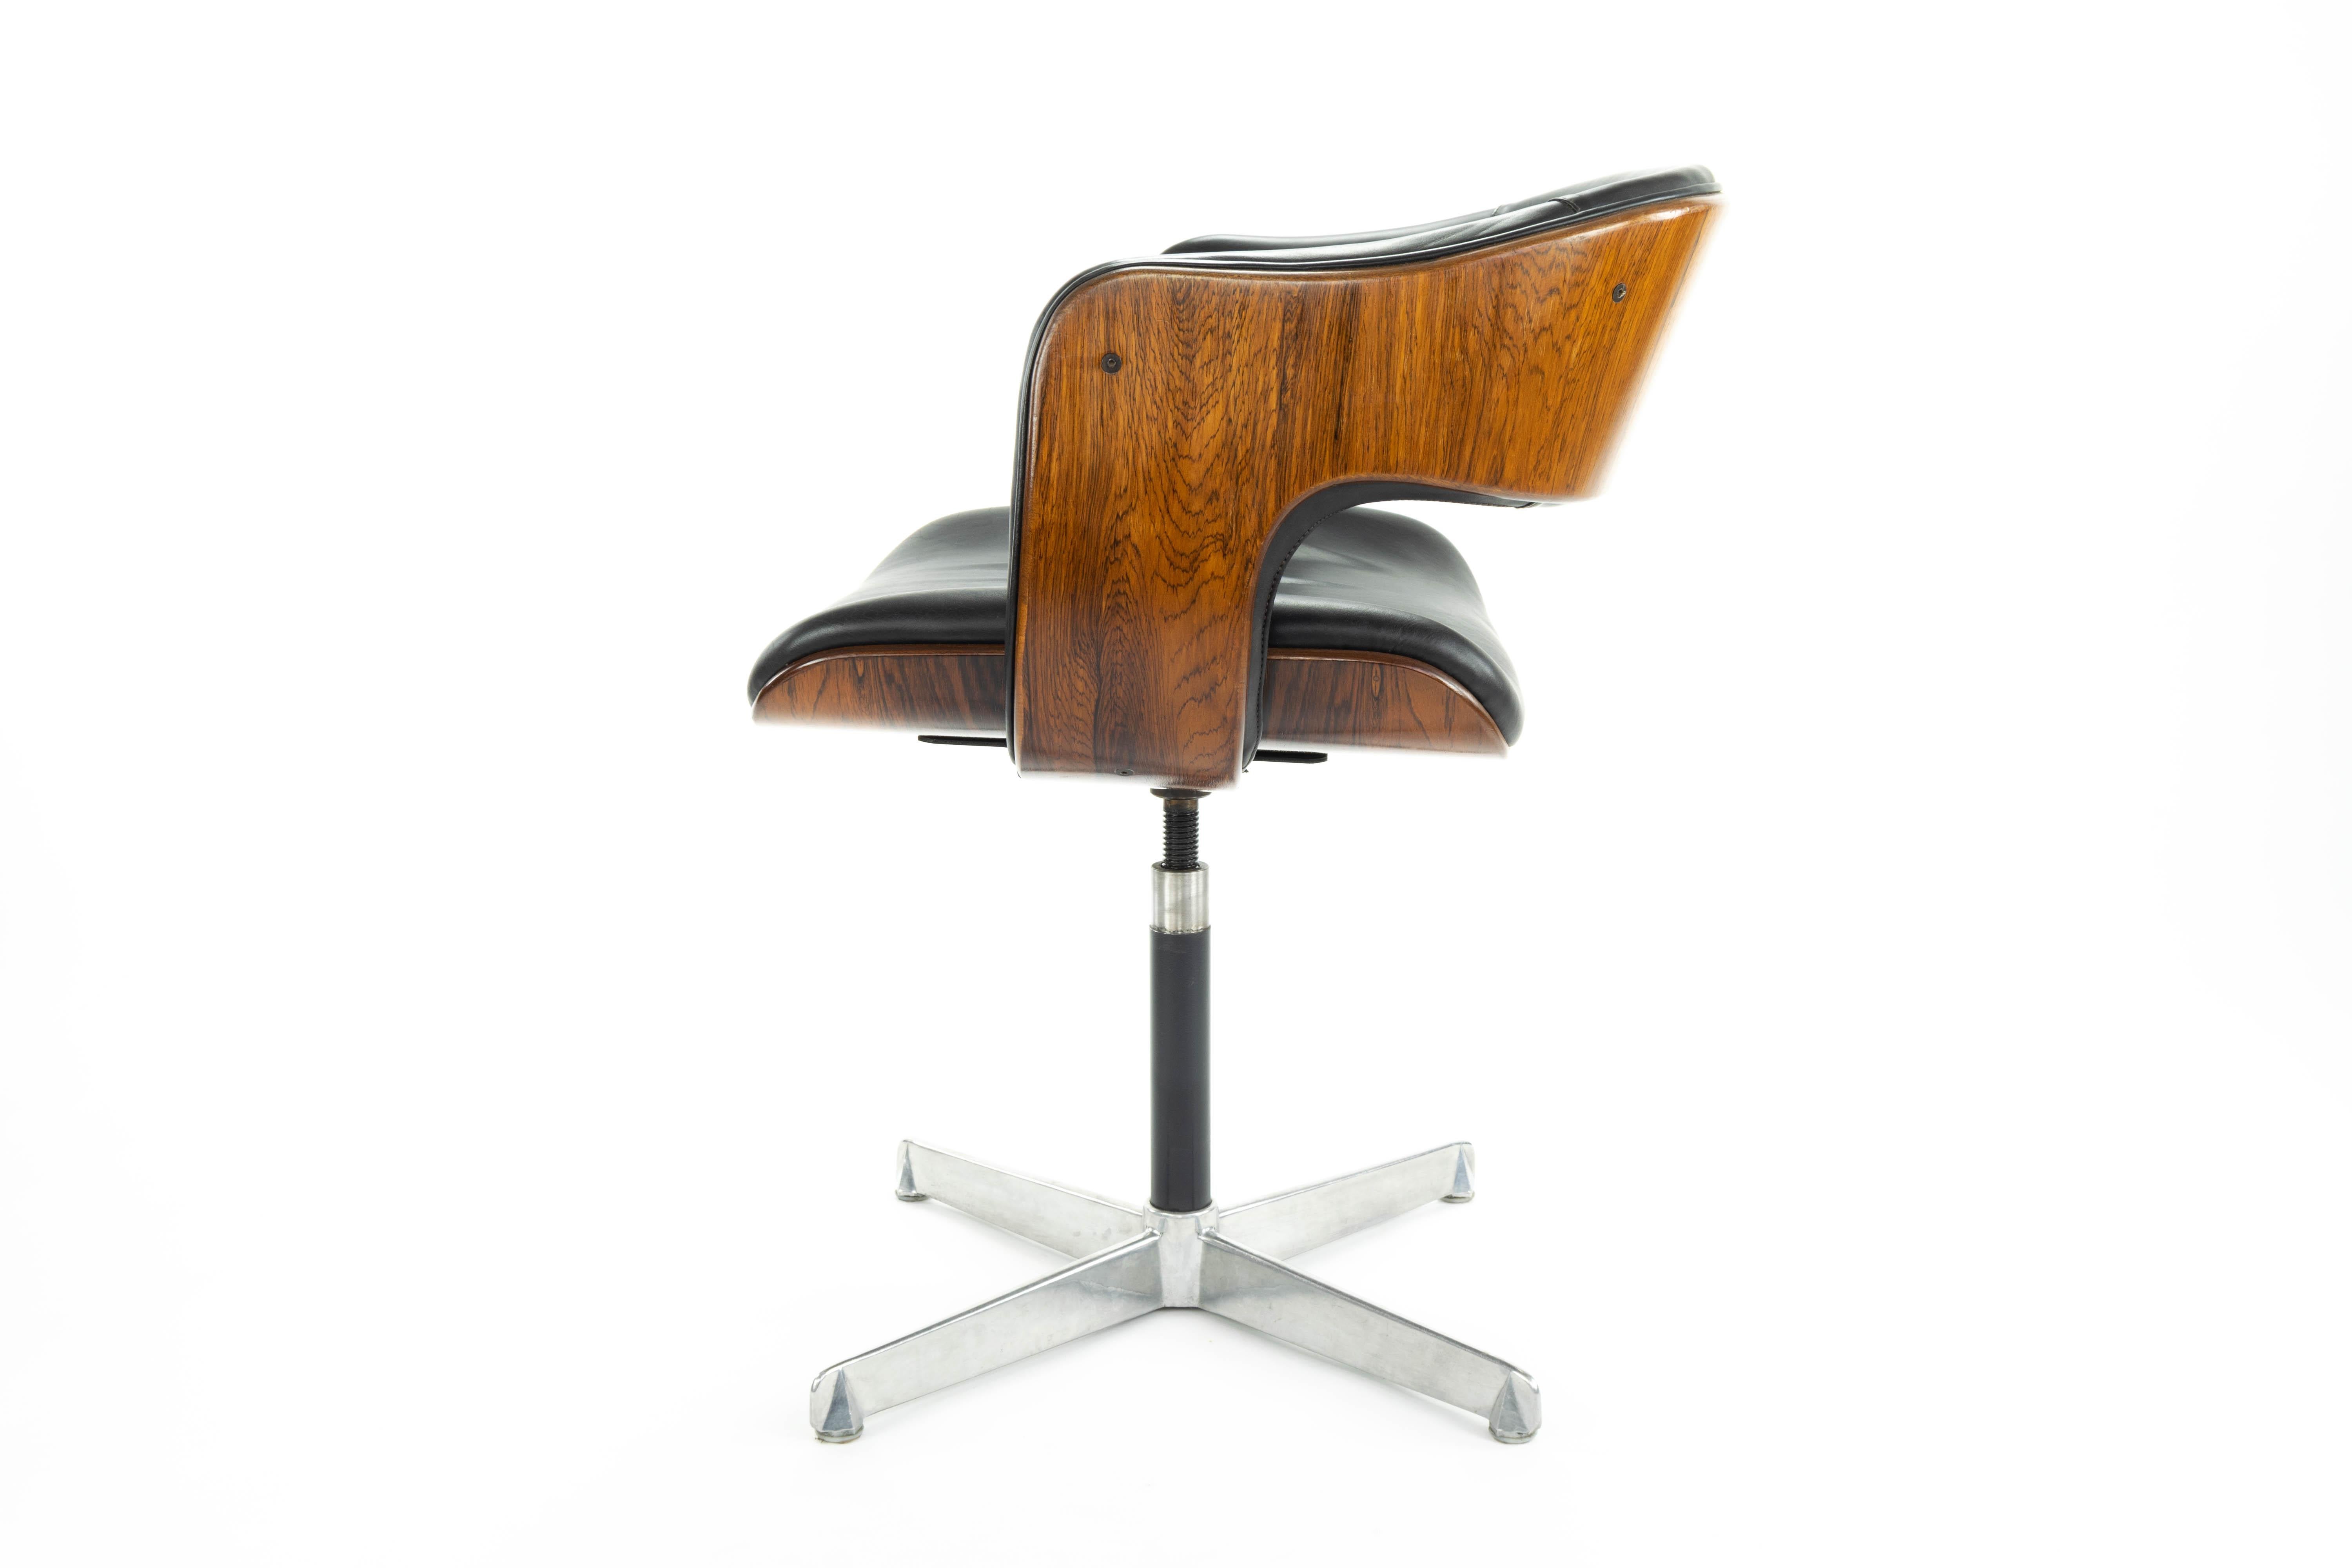 Swivel and adjustable height Oxford armchair designed by Martin Grierson for Arflex in 1963. Produced by Arflex Valencia, Spain. The wooden structure of laminated wood and the upholstery of black natural leather are in very good